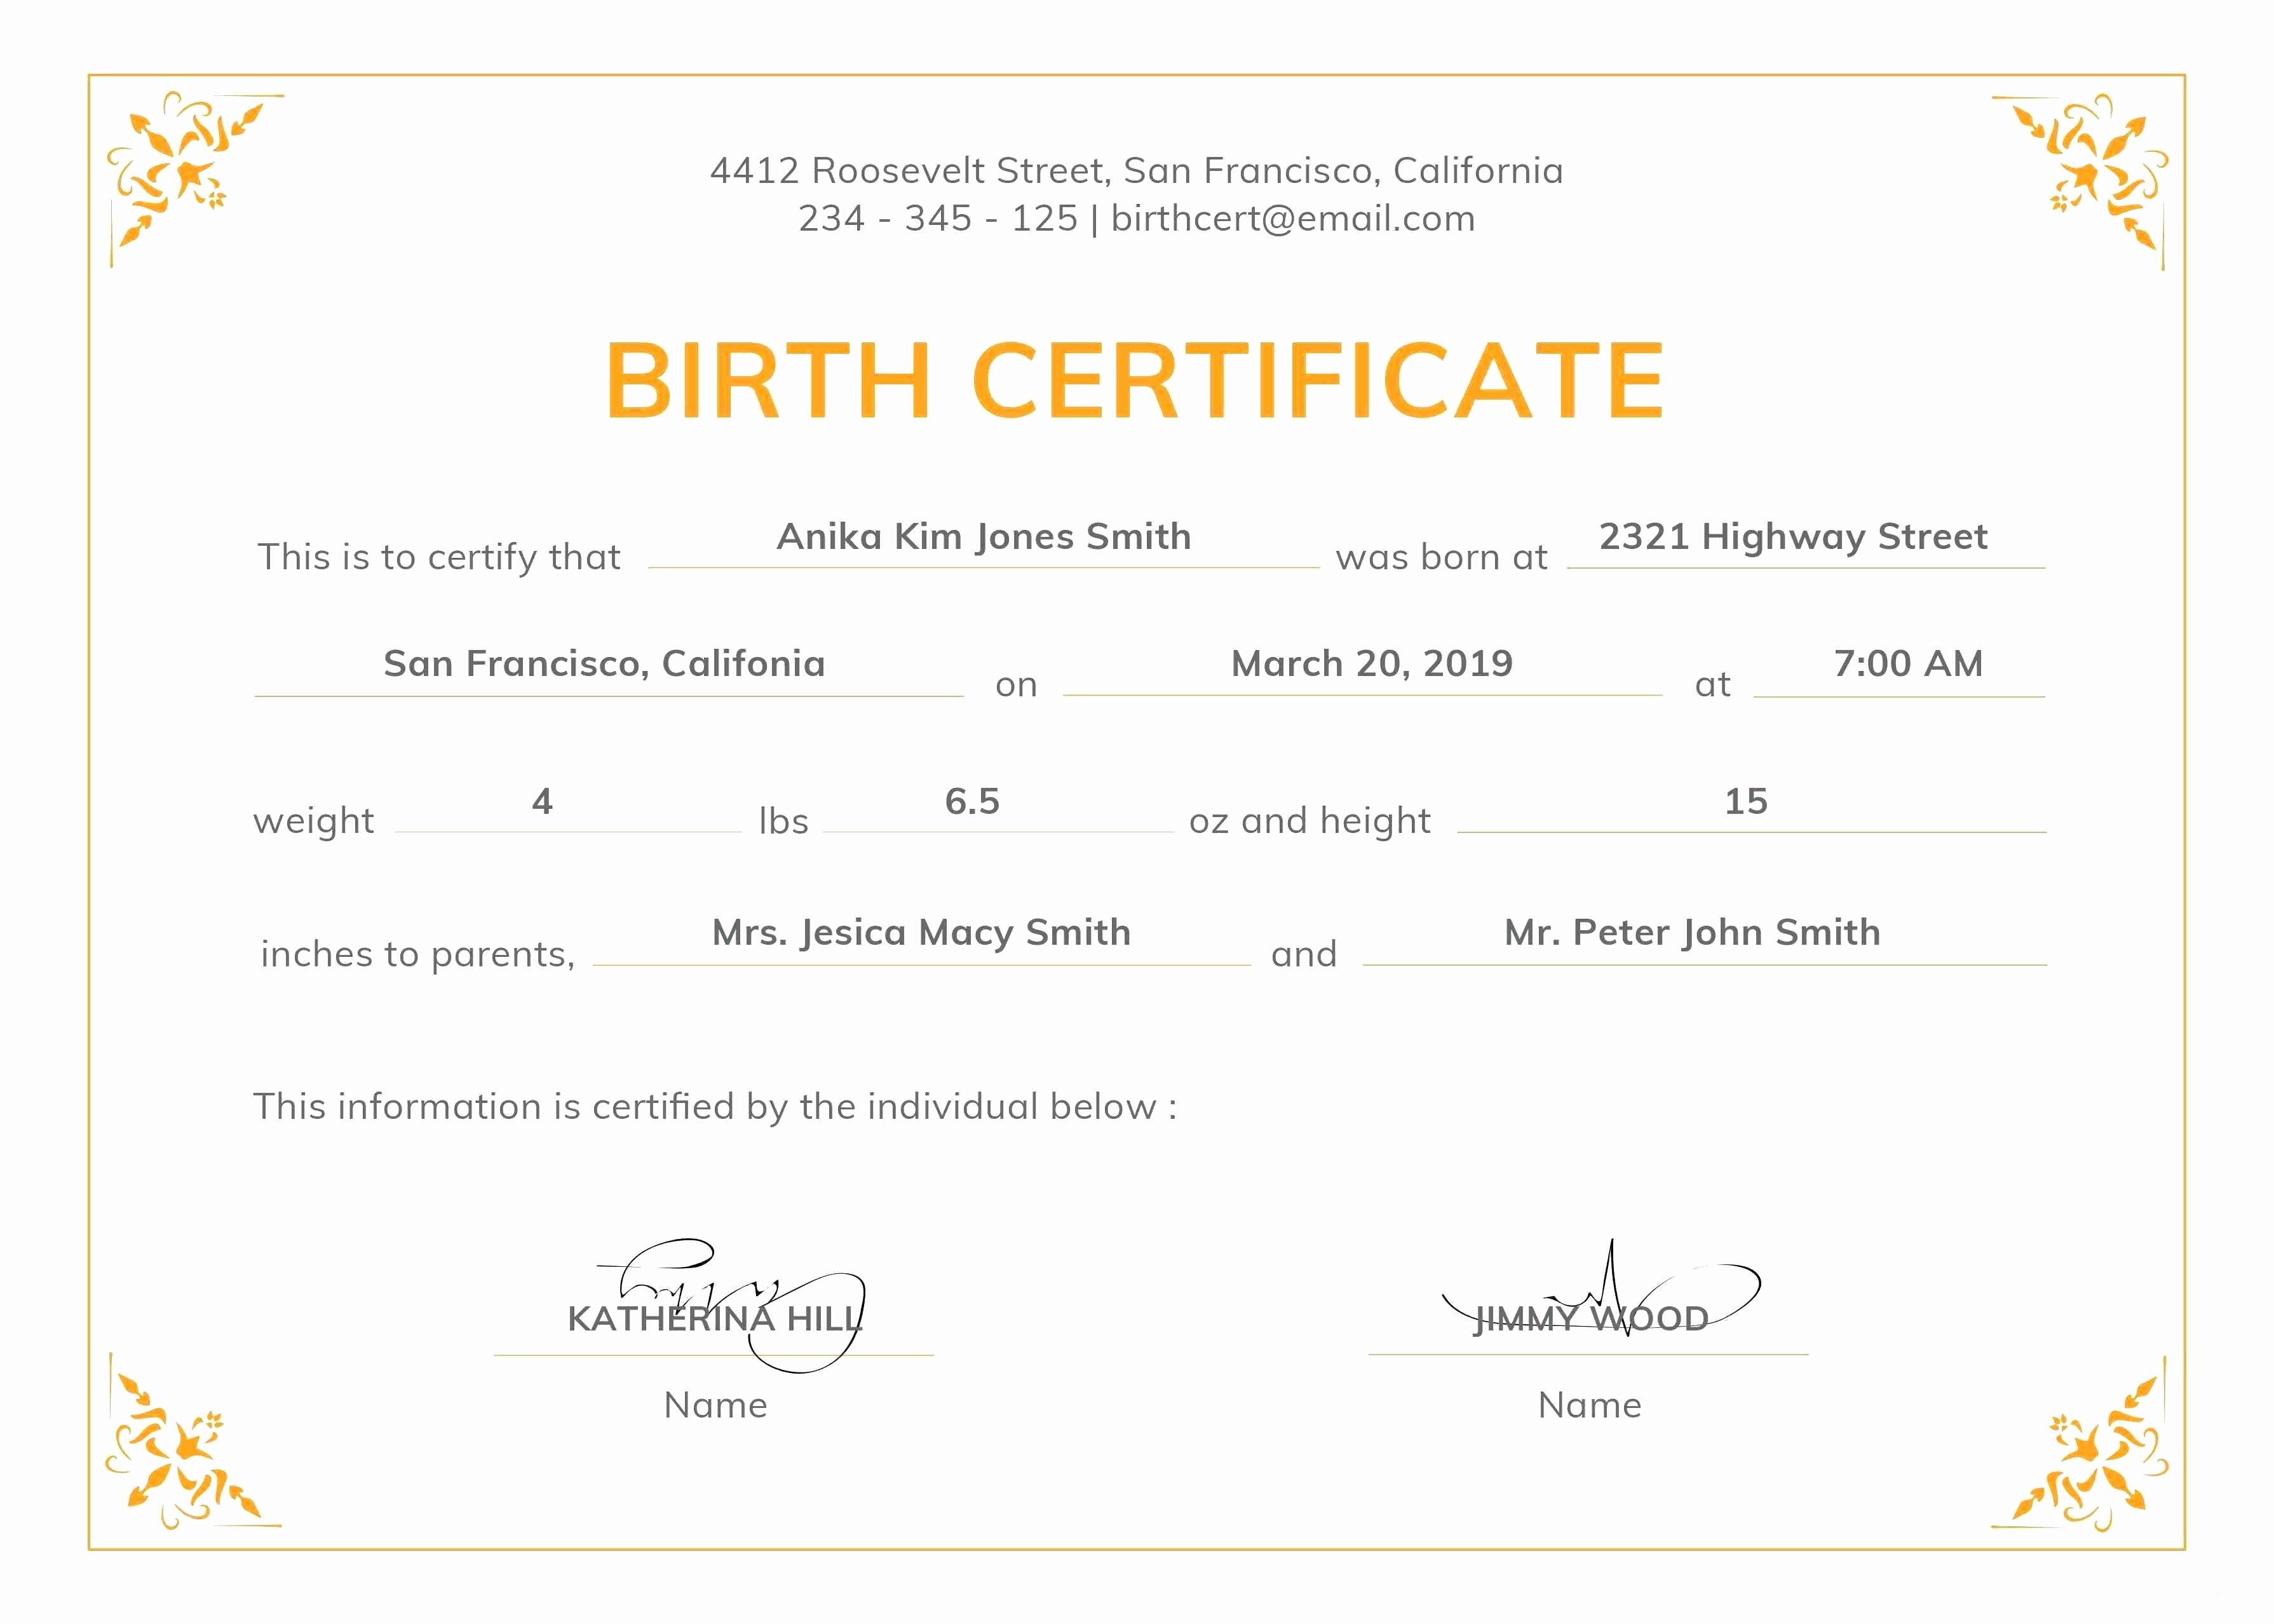 Official Birth Certificate Templates Awesome Reborn Birth Certificate Template Free